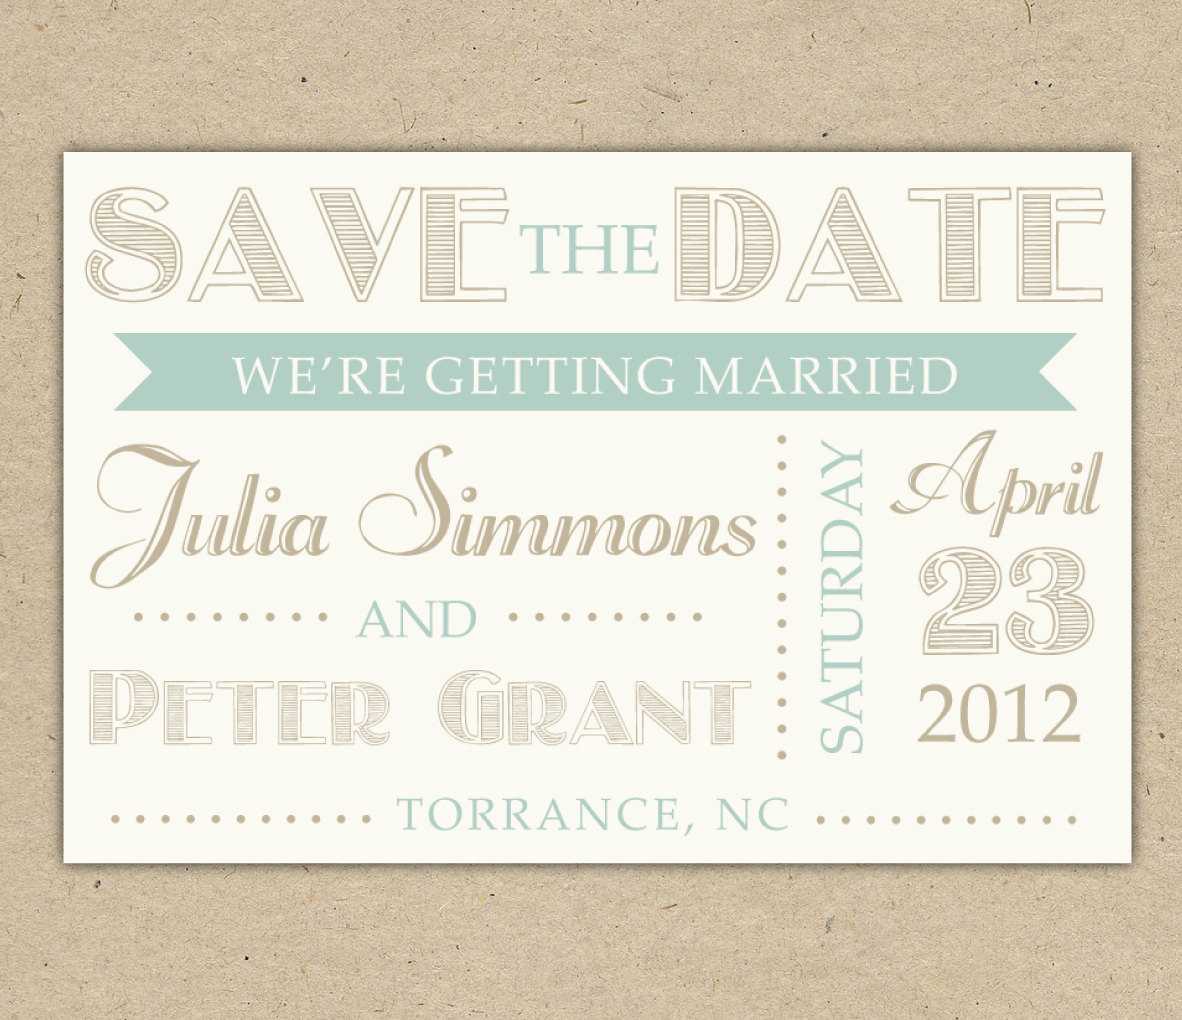 Save The Date Cards Templates For Weddings Within Save The Date Templates Word